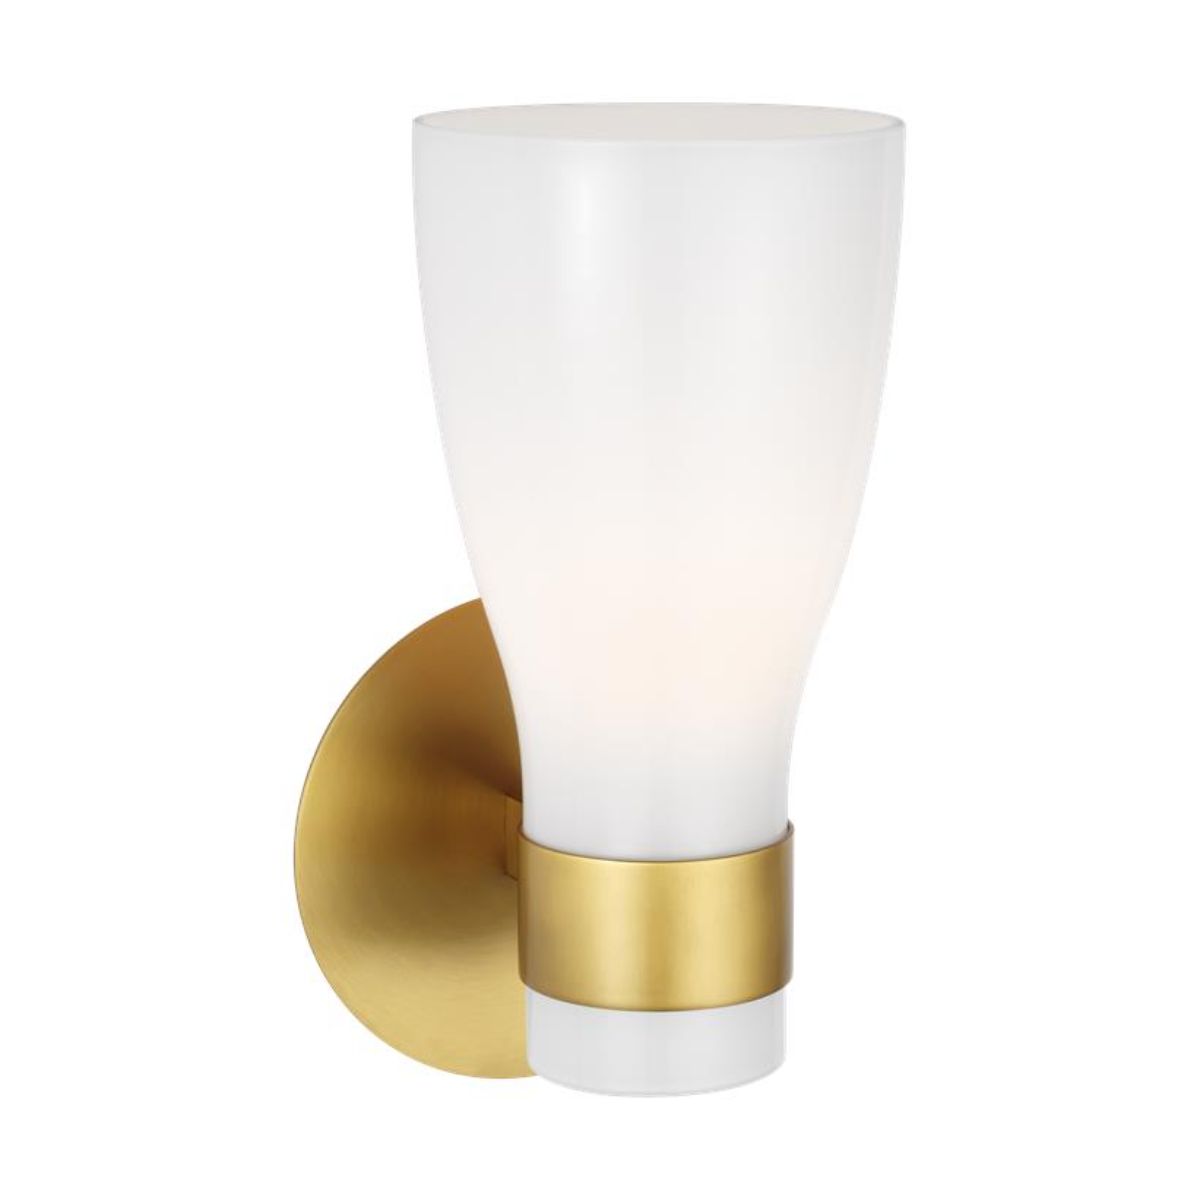 Moritz 11 in. Armed Sconce Burnished Brass with Milk White Glass finish